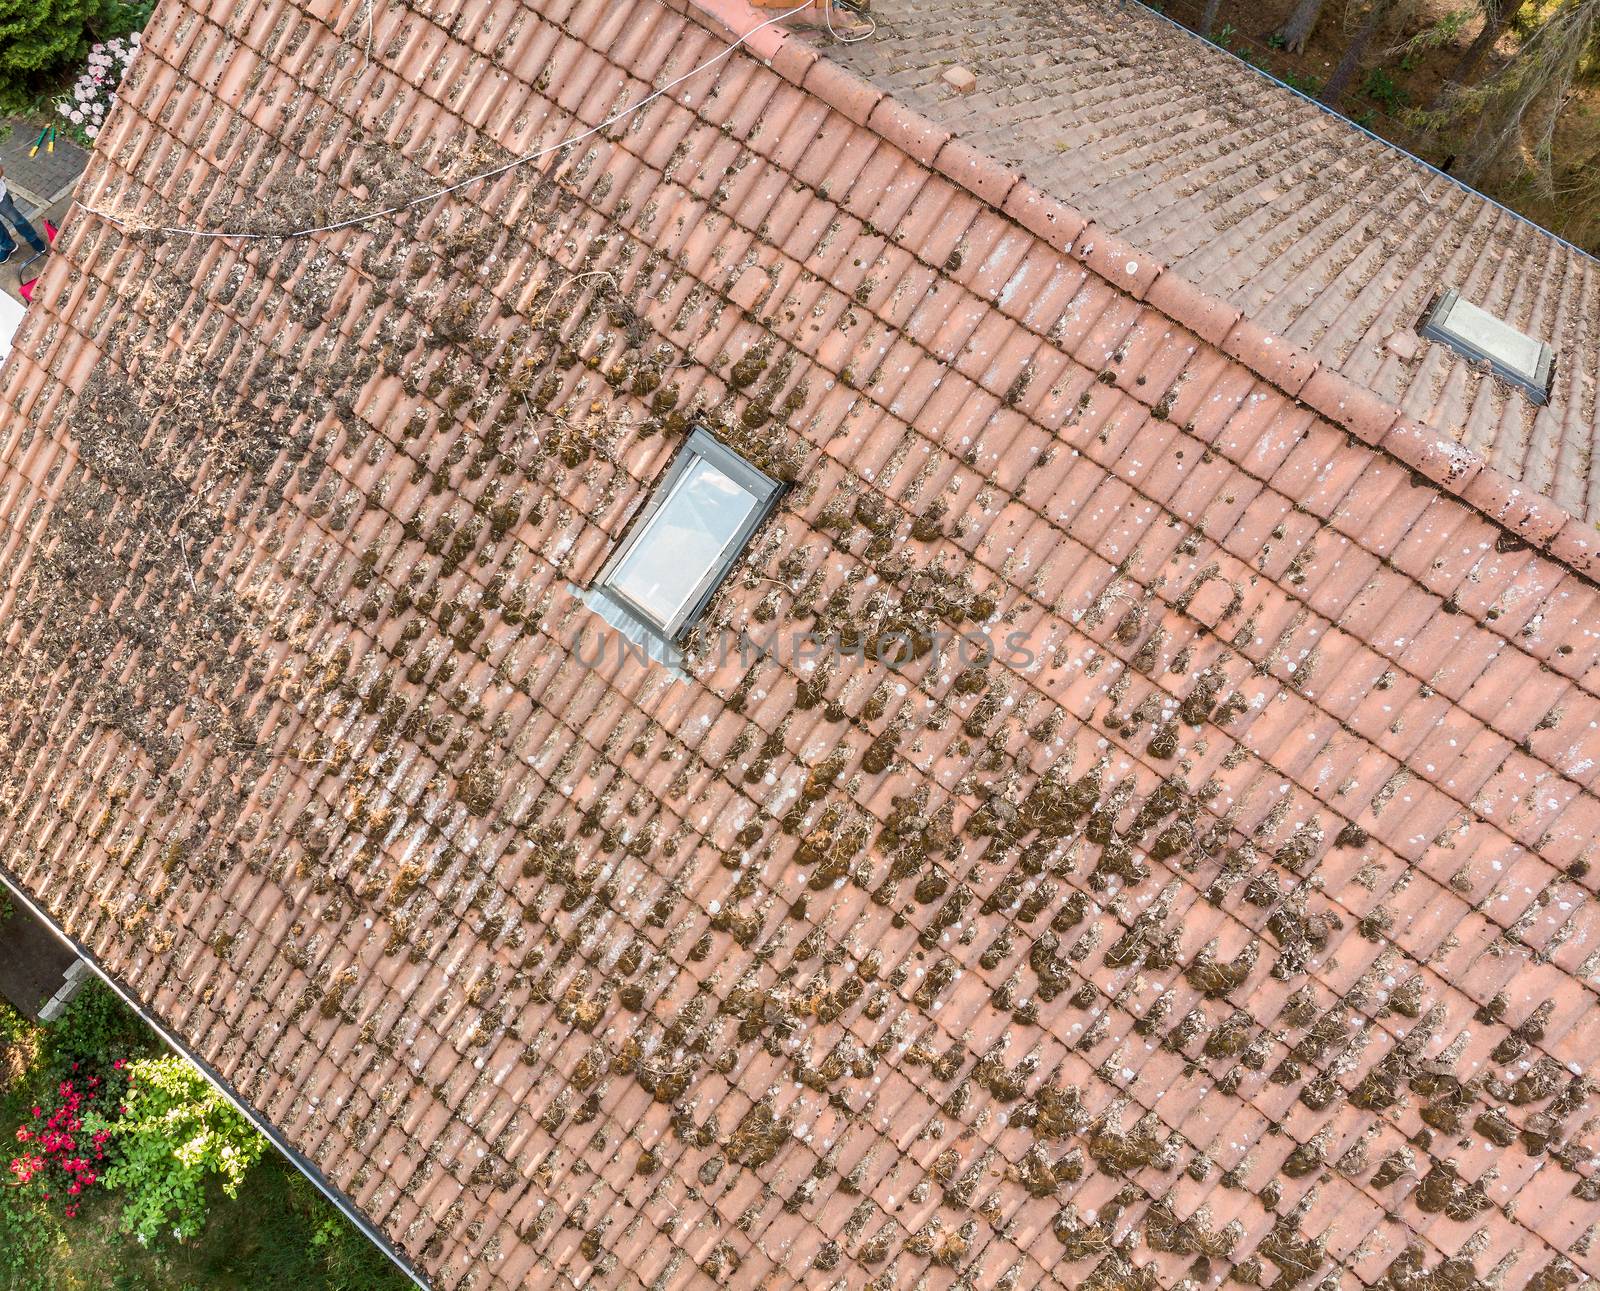 Overflight of the roof of a single-family house to check the condition of the roof tiles, aerial view by geogif